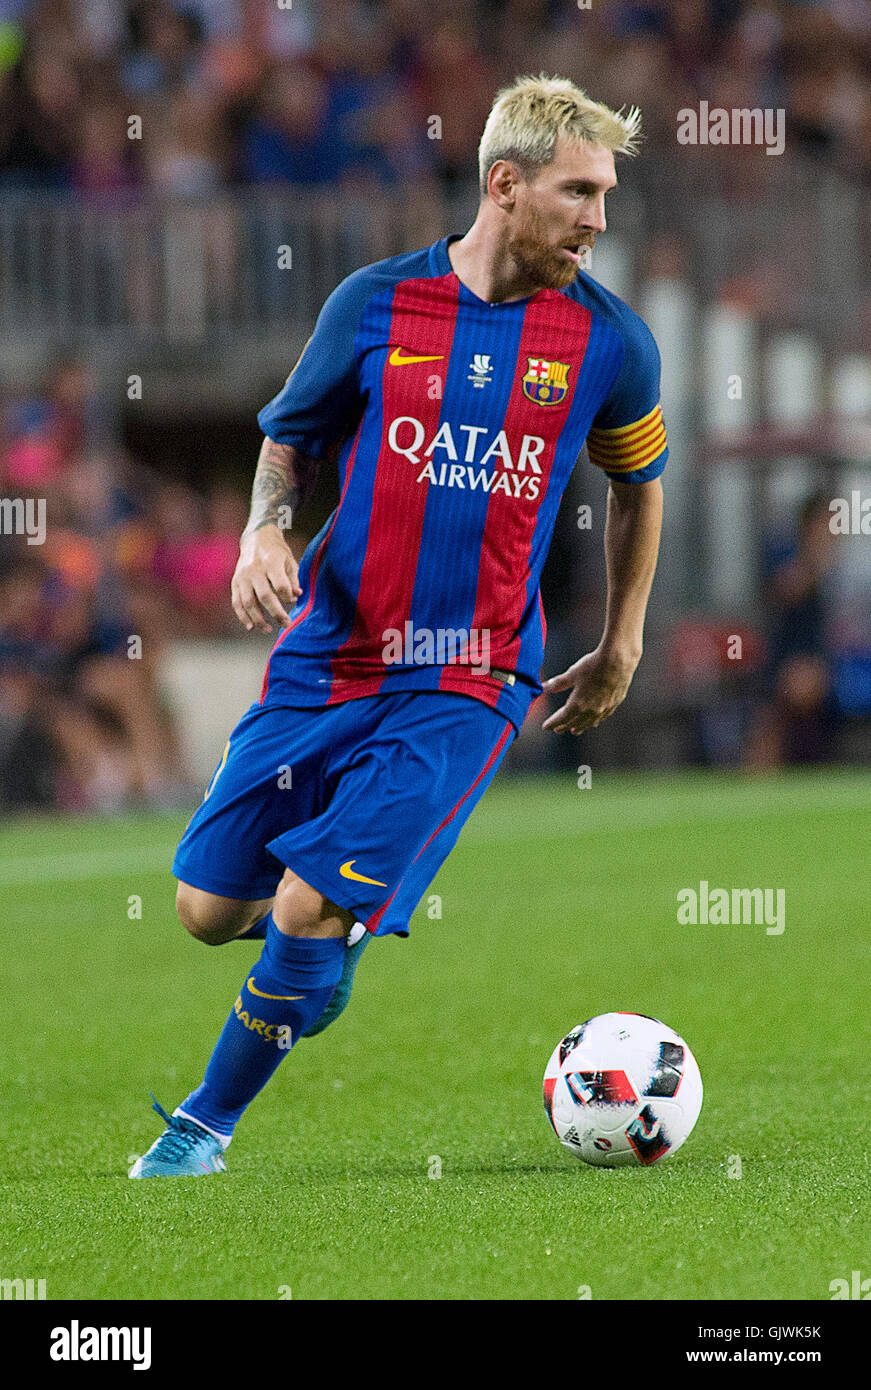 Barcelona Spain 17th Aug 16 Fc Barcelona S Lionel Messi Controls The Ball During The 16 Spanish Super Cup 2nd Leg Match Against Sevilla Fc At The Camp Nou Stadium In Barcelona Spain